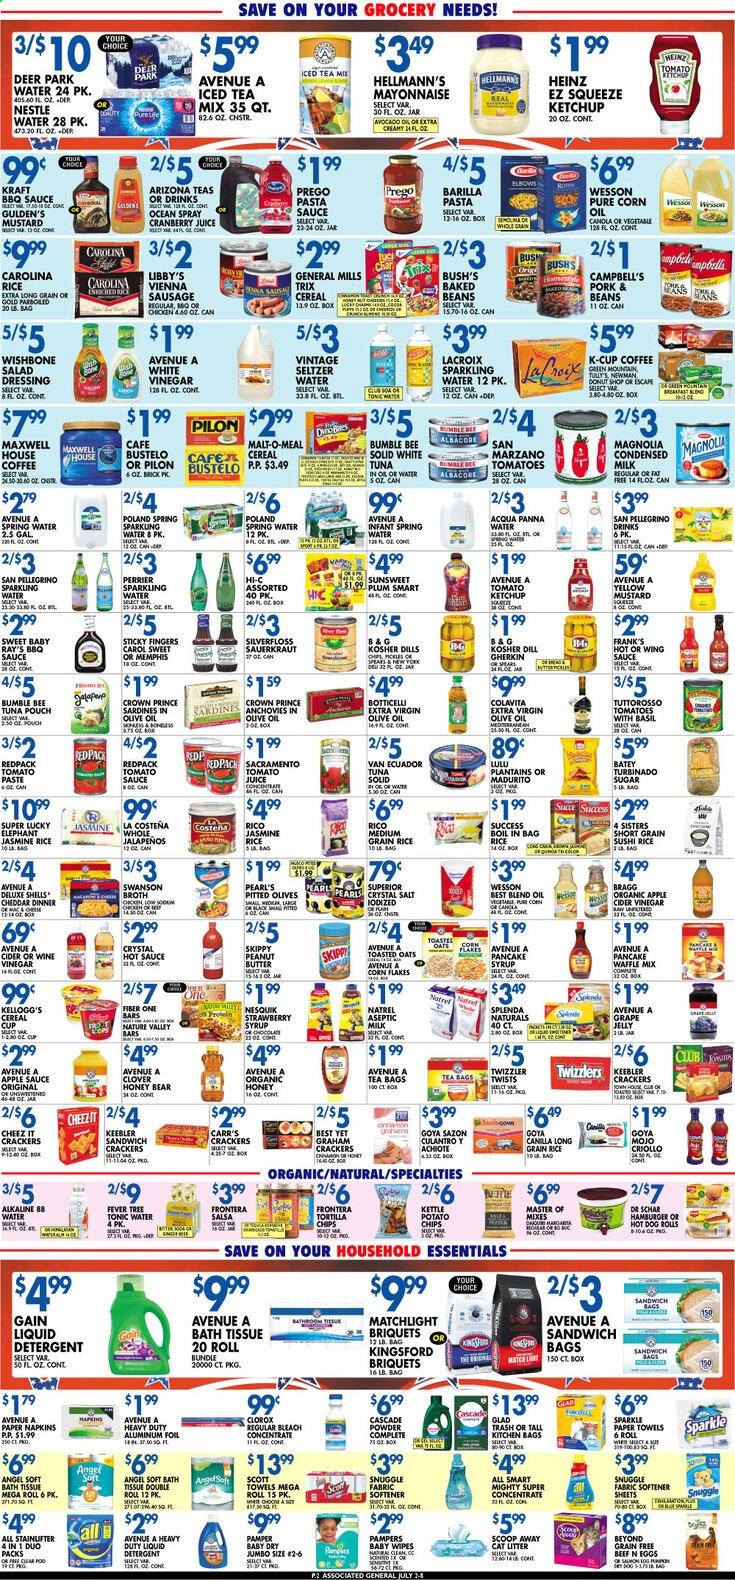 thumbnail - Associated Supermarkets Flyer - 07/02/2021 - 07/08/2021 - Sales products - tomatoes, avocado, salmon, sardines, tuna, Campbell's, hot dog, pasta sauce, hamburger, Bumble Bee, sauce, Barilla, Kraft®, sausage, vienna sausage, Nesquik, milk, condensed milk, eggs, mayonnaise, Hellmann’s, graham crackers, Nestlé, jelly, crackers, Kellogg's, Keebler, tortilla chips, potato chips, chips, sugar, broth, malt, anchovies, sauerkraut, tomato paste, tomato sauce, Heinz, olives, baked beans, Goya, cereals, corn flakes, Trix, Nature Valley, Fiber One, toasted oats, rice, jasmine rice, parboiled rice, long grain rice, medium grain rice, esponja, dill, BBQ sauce, mustard, salad dressing, hot sauce, ketchup, dressing, salsa, wing sauce, apple cider vinegar, corn oil, extra virgin olive oil, wine vinegar, apple sauce, honey, peanut butter, pancake syrup, syrup, cranberry juice, juice, Hi-c, tonic, AriZona, Perrier, seltzer water, spring water, sparkling water, San Pellegrino, Maxwell House, tea bags, coffee, coffee capsules, K-Cups, Green Mountain, cider, wipes, Pampers, baby wipes, napkins, bath tissue, Scott, kitchen towels, paper towels, detergent, Gain, bleach, Clorox, Cascade, Snuggle, fabric softener, liquid detergent, Pamper, plantains. Page 2.